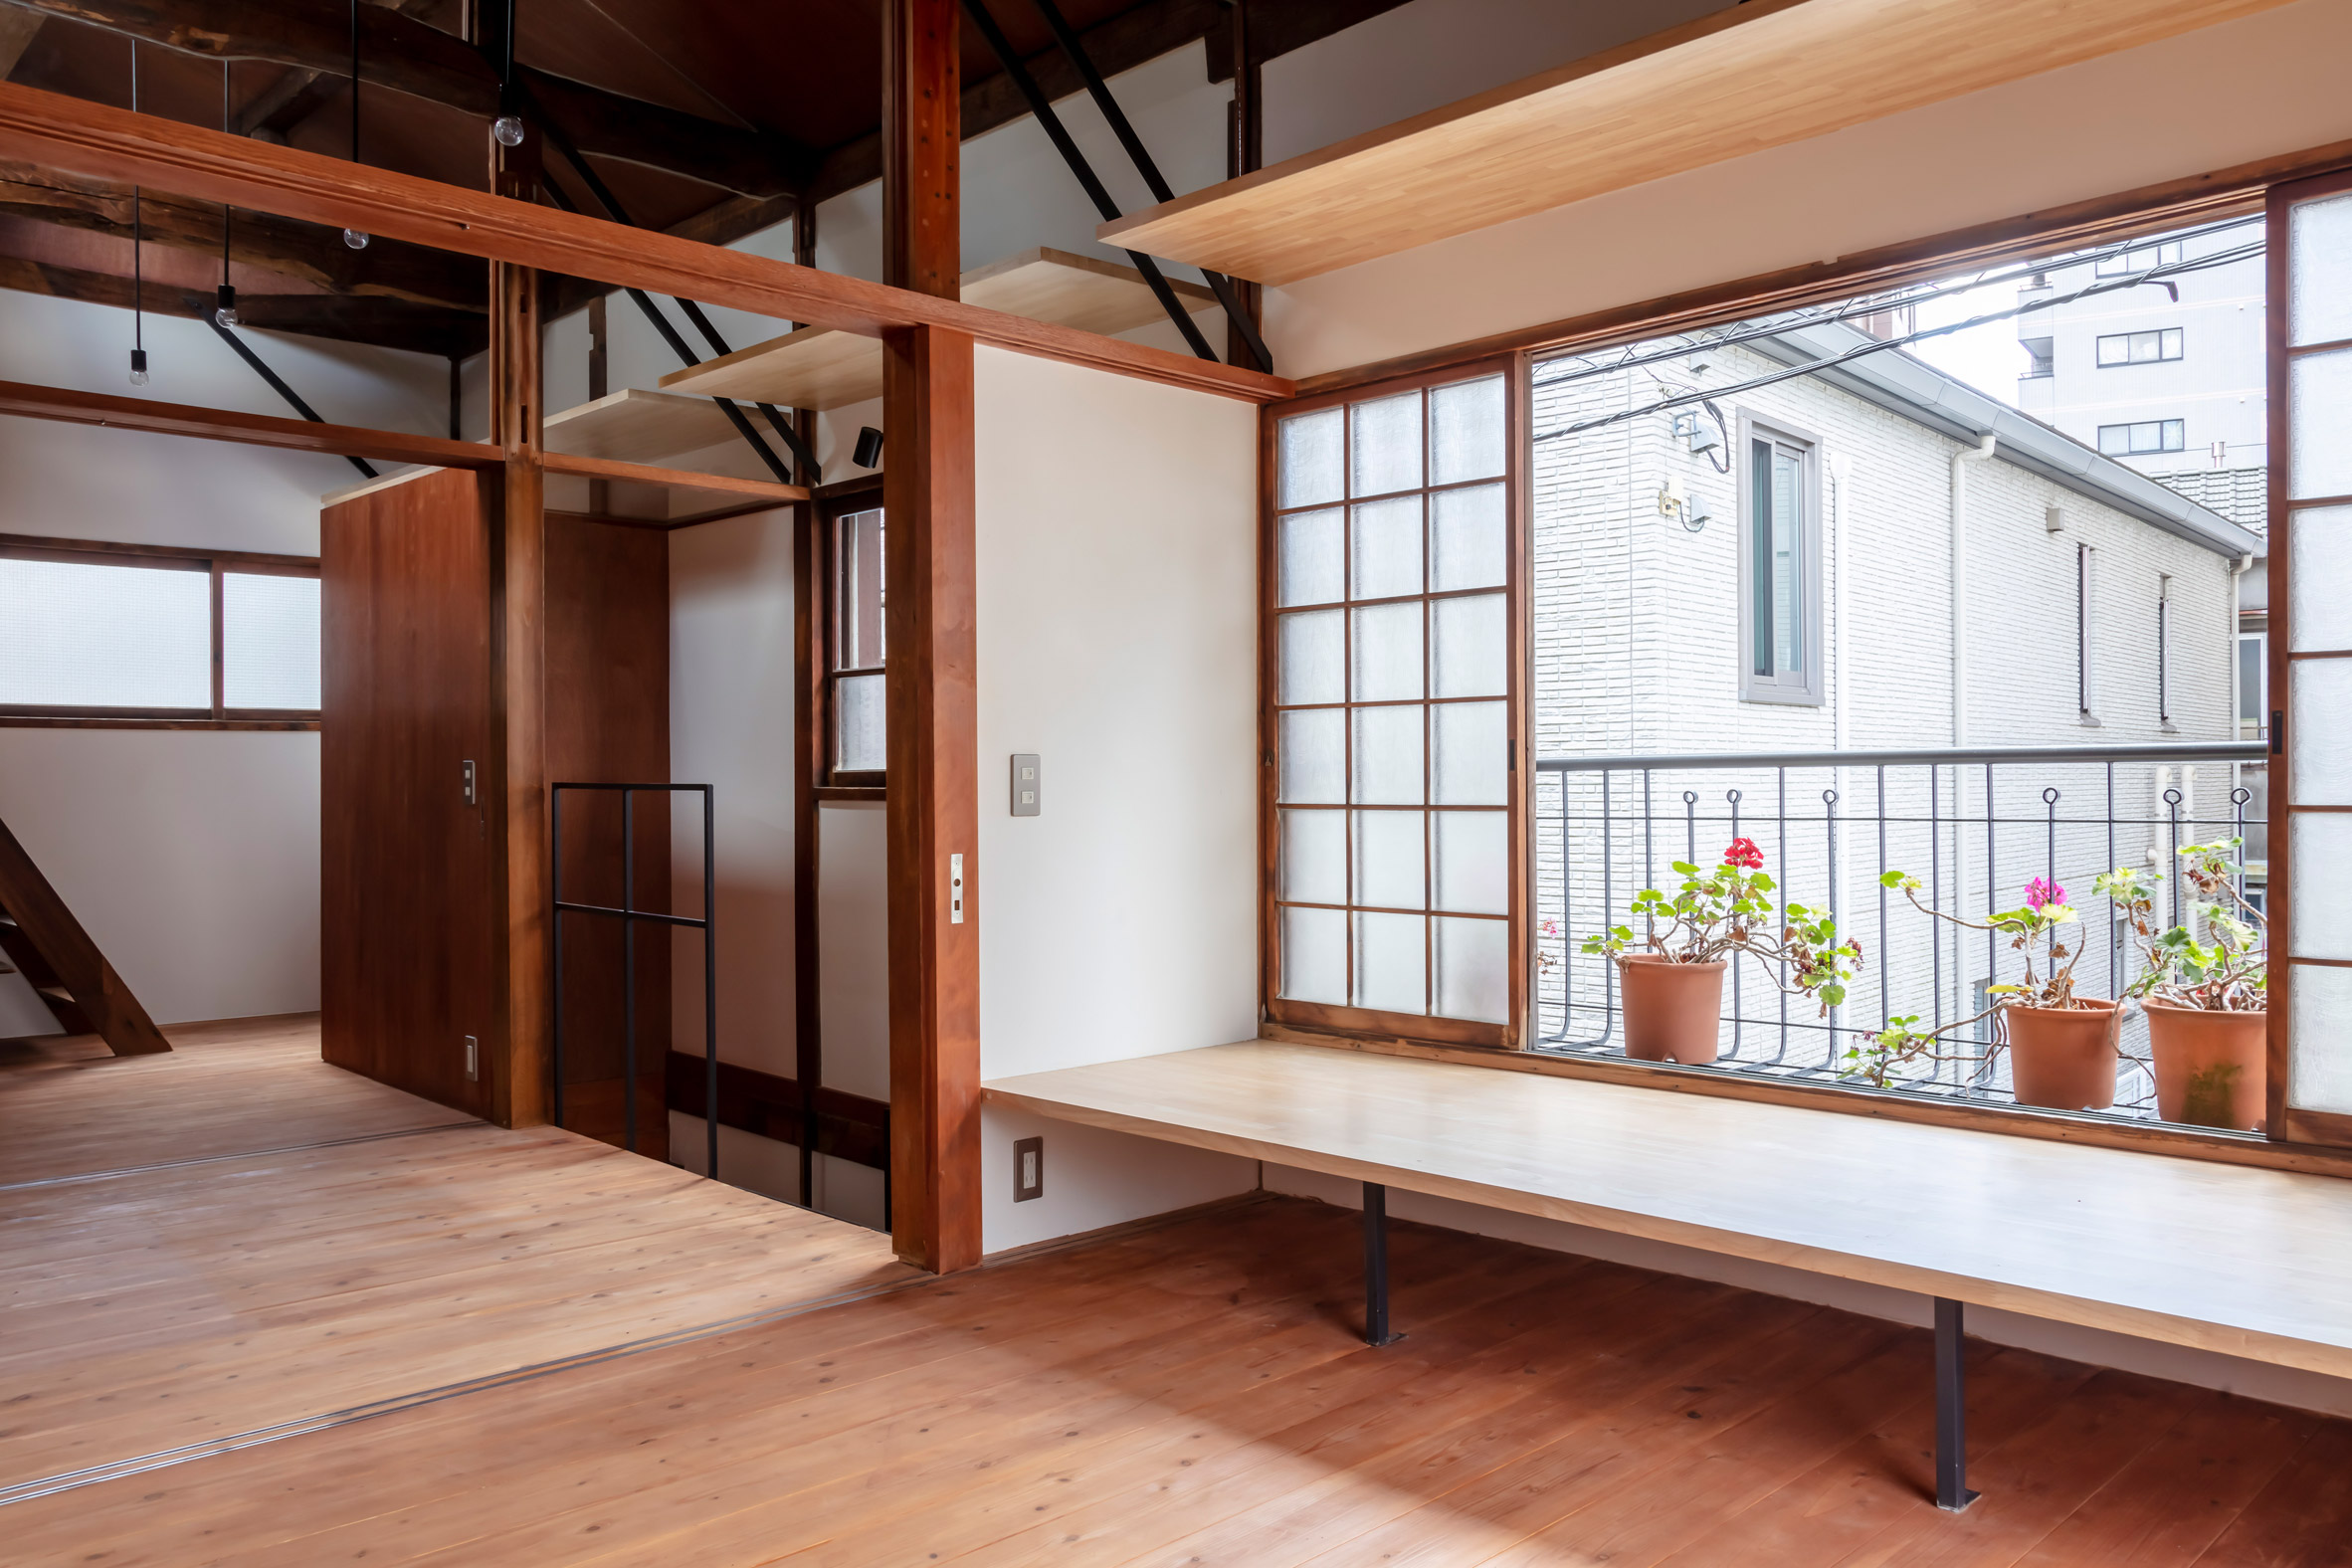 Japanese home with shelving and open window